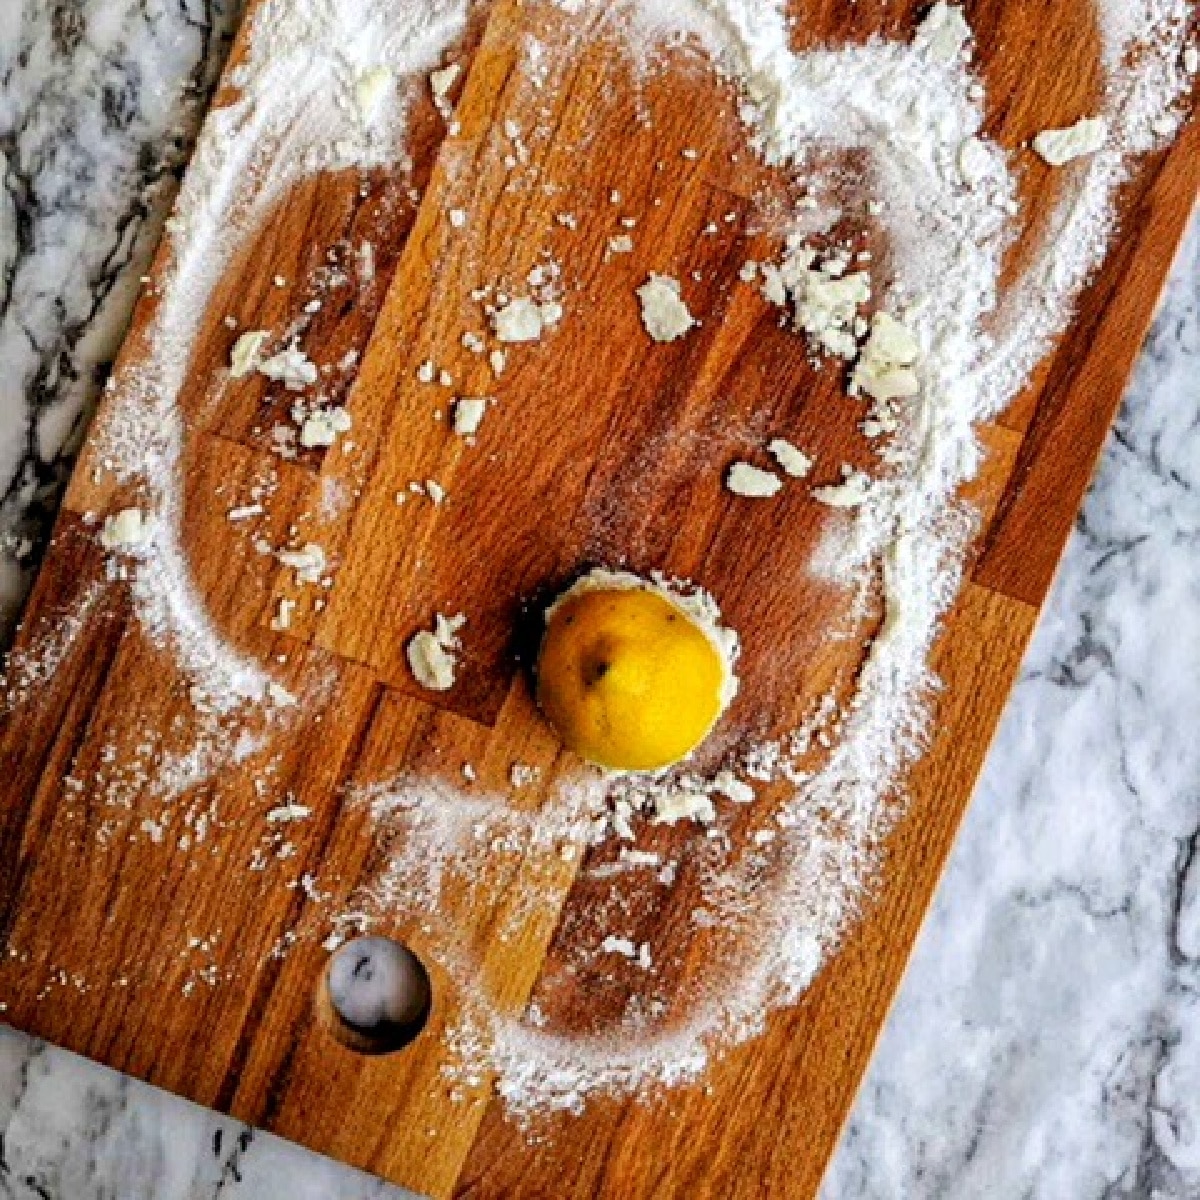 How to Clean Wooden Cutting Boards 2019